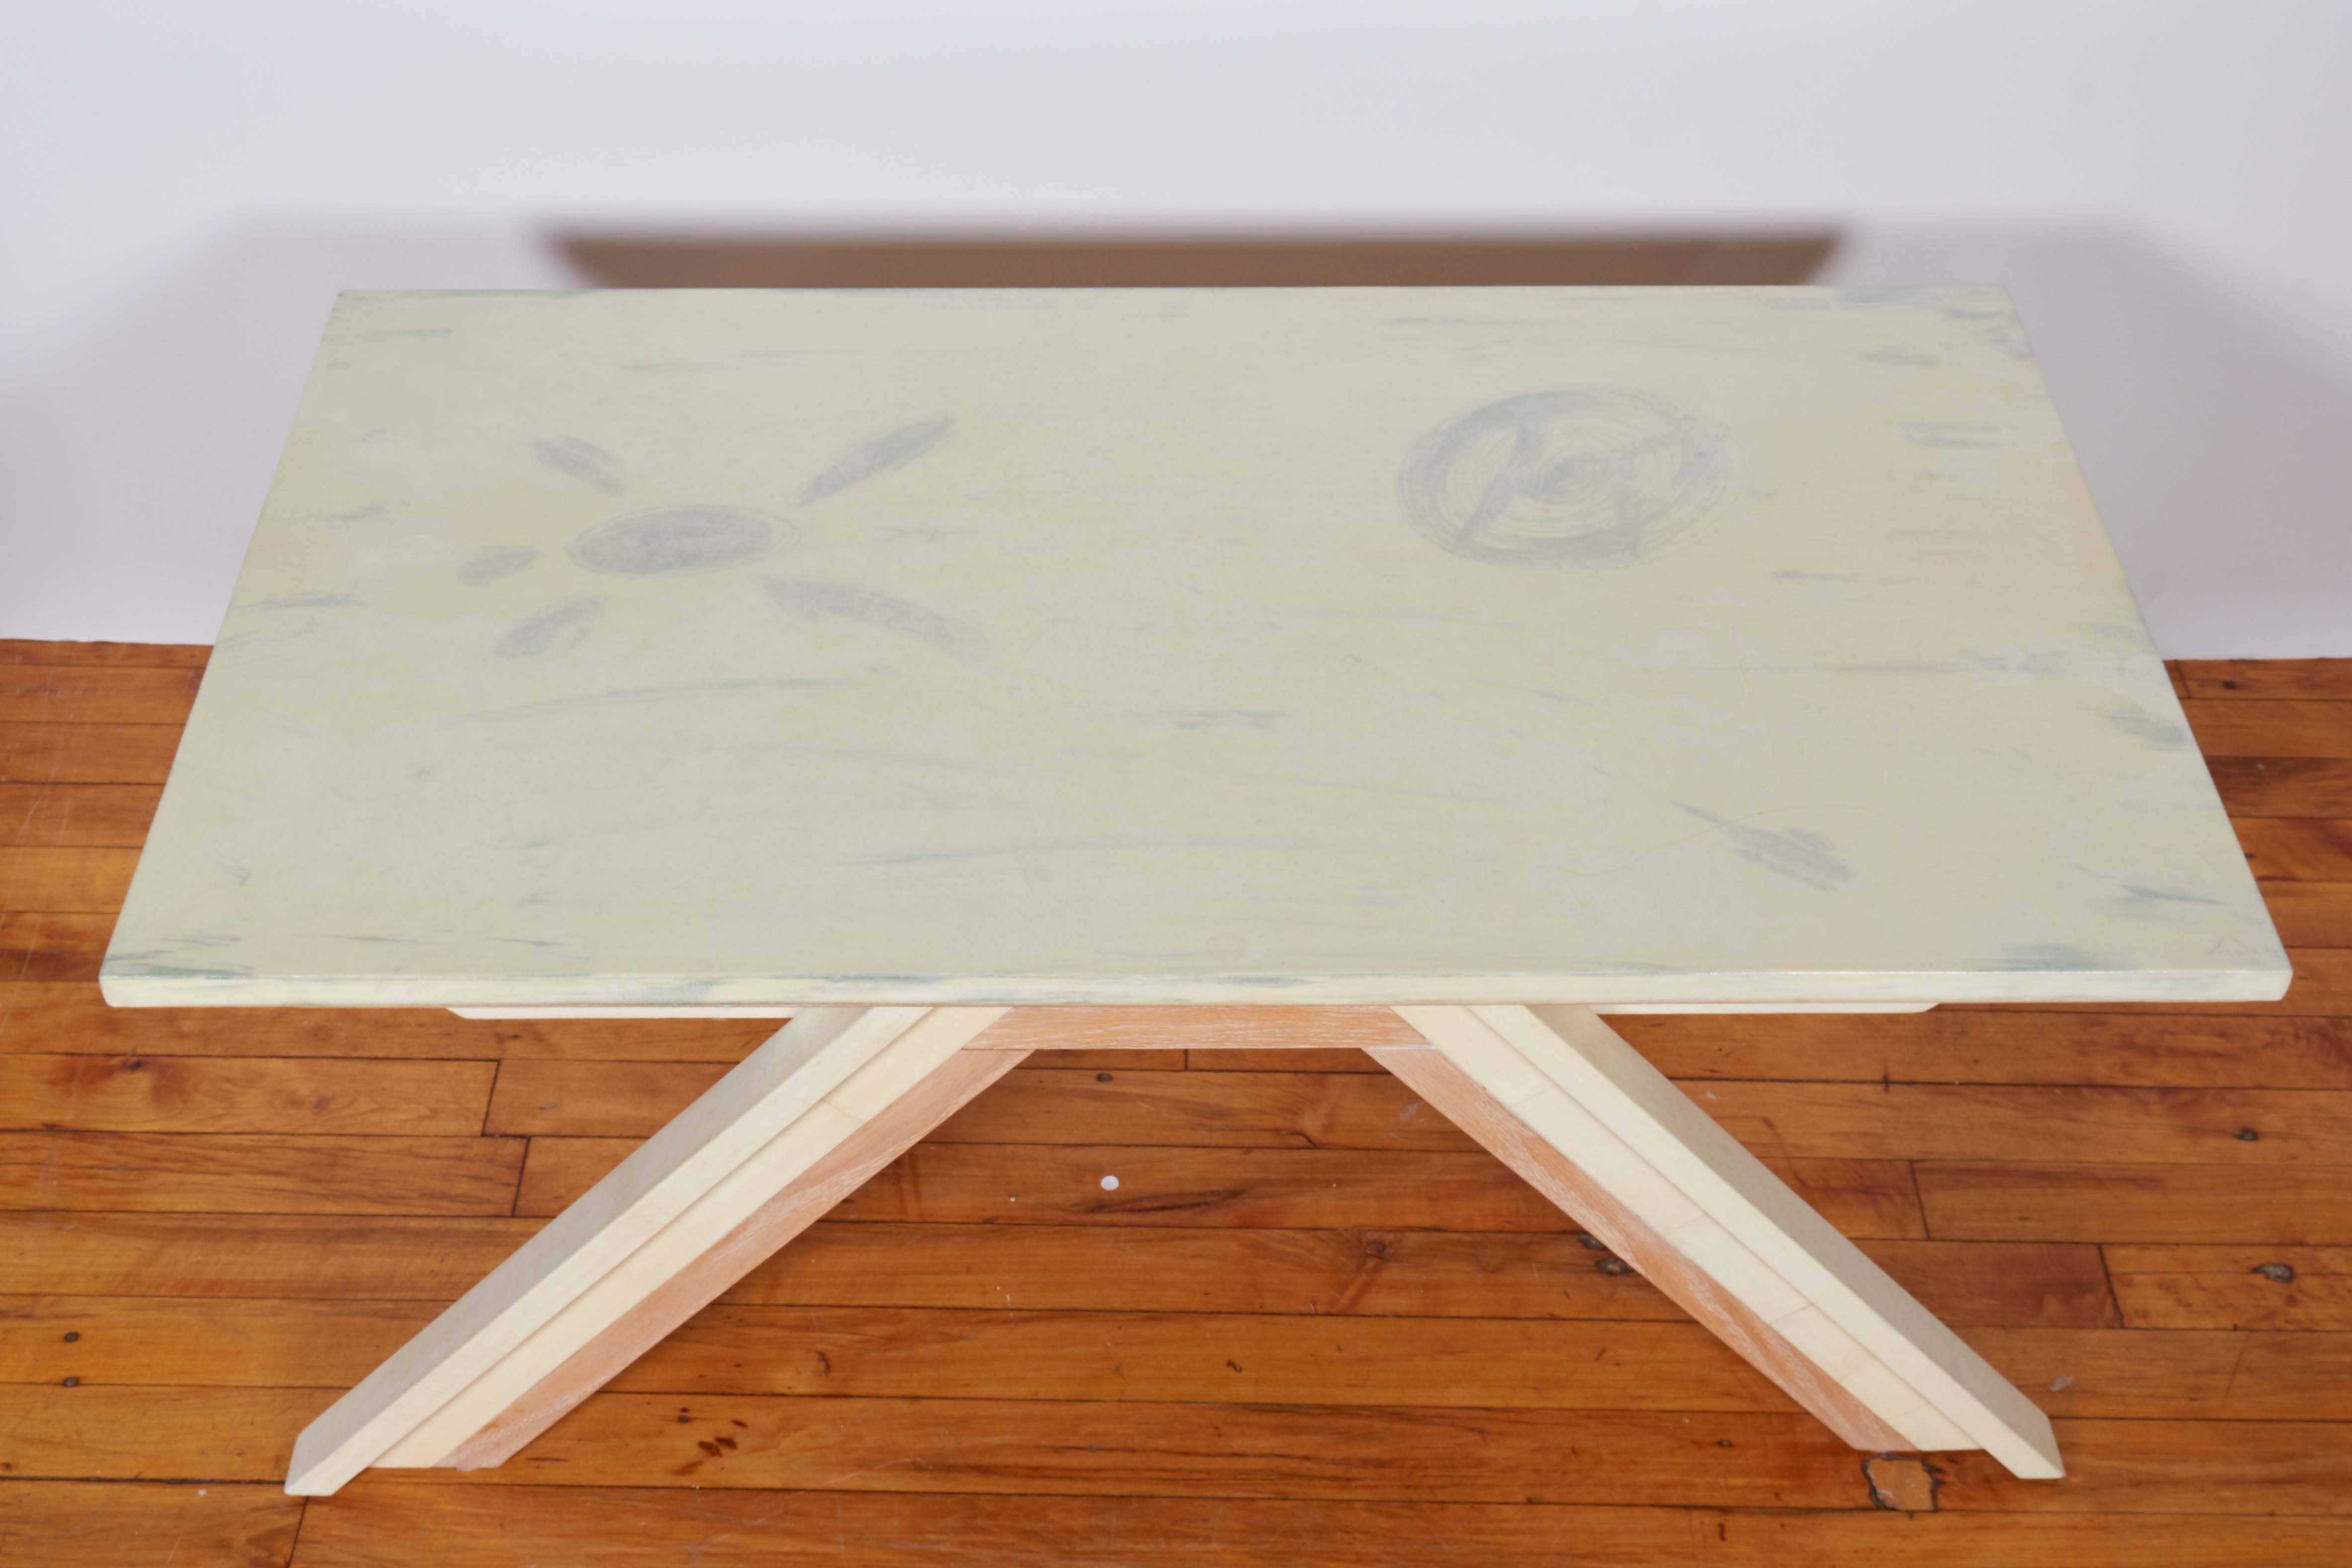 A contemporary coffee table, produced 2012 by Beni Studio, titled 'The Bridge', parchment top with artful abstract designs, raised on painted oakwood base with slanted legs. Excellent condition.

10826